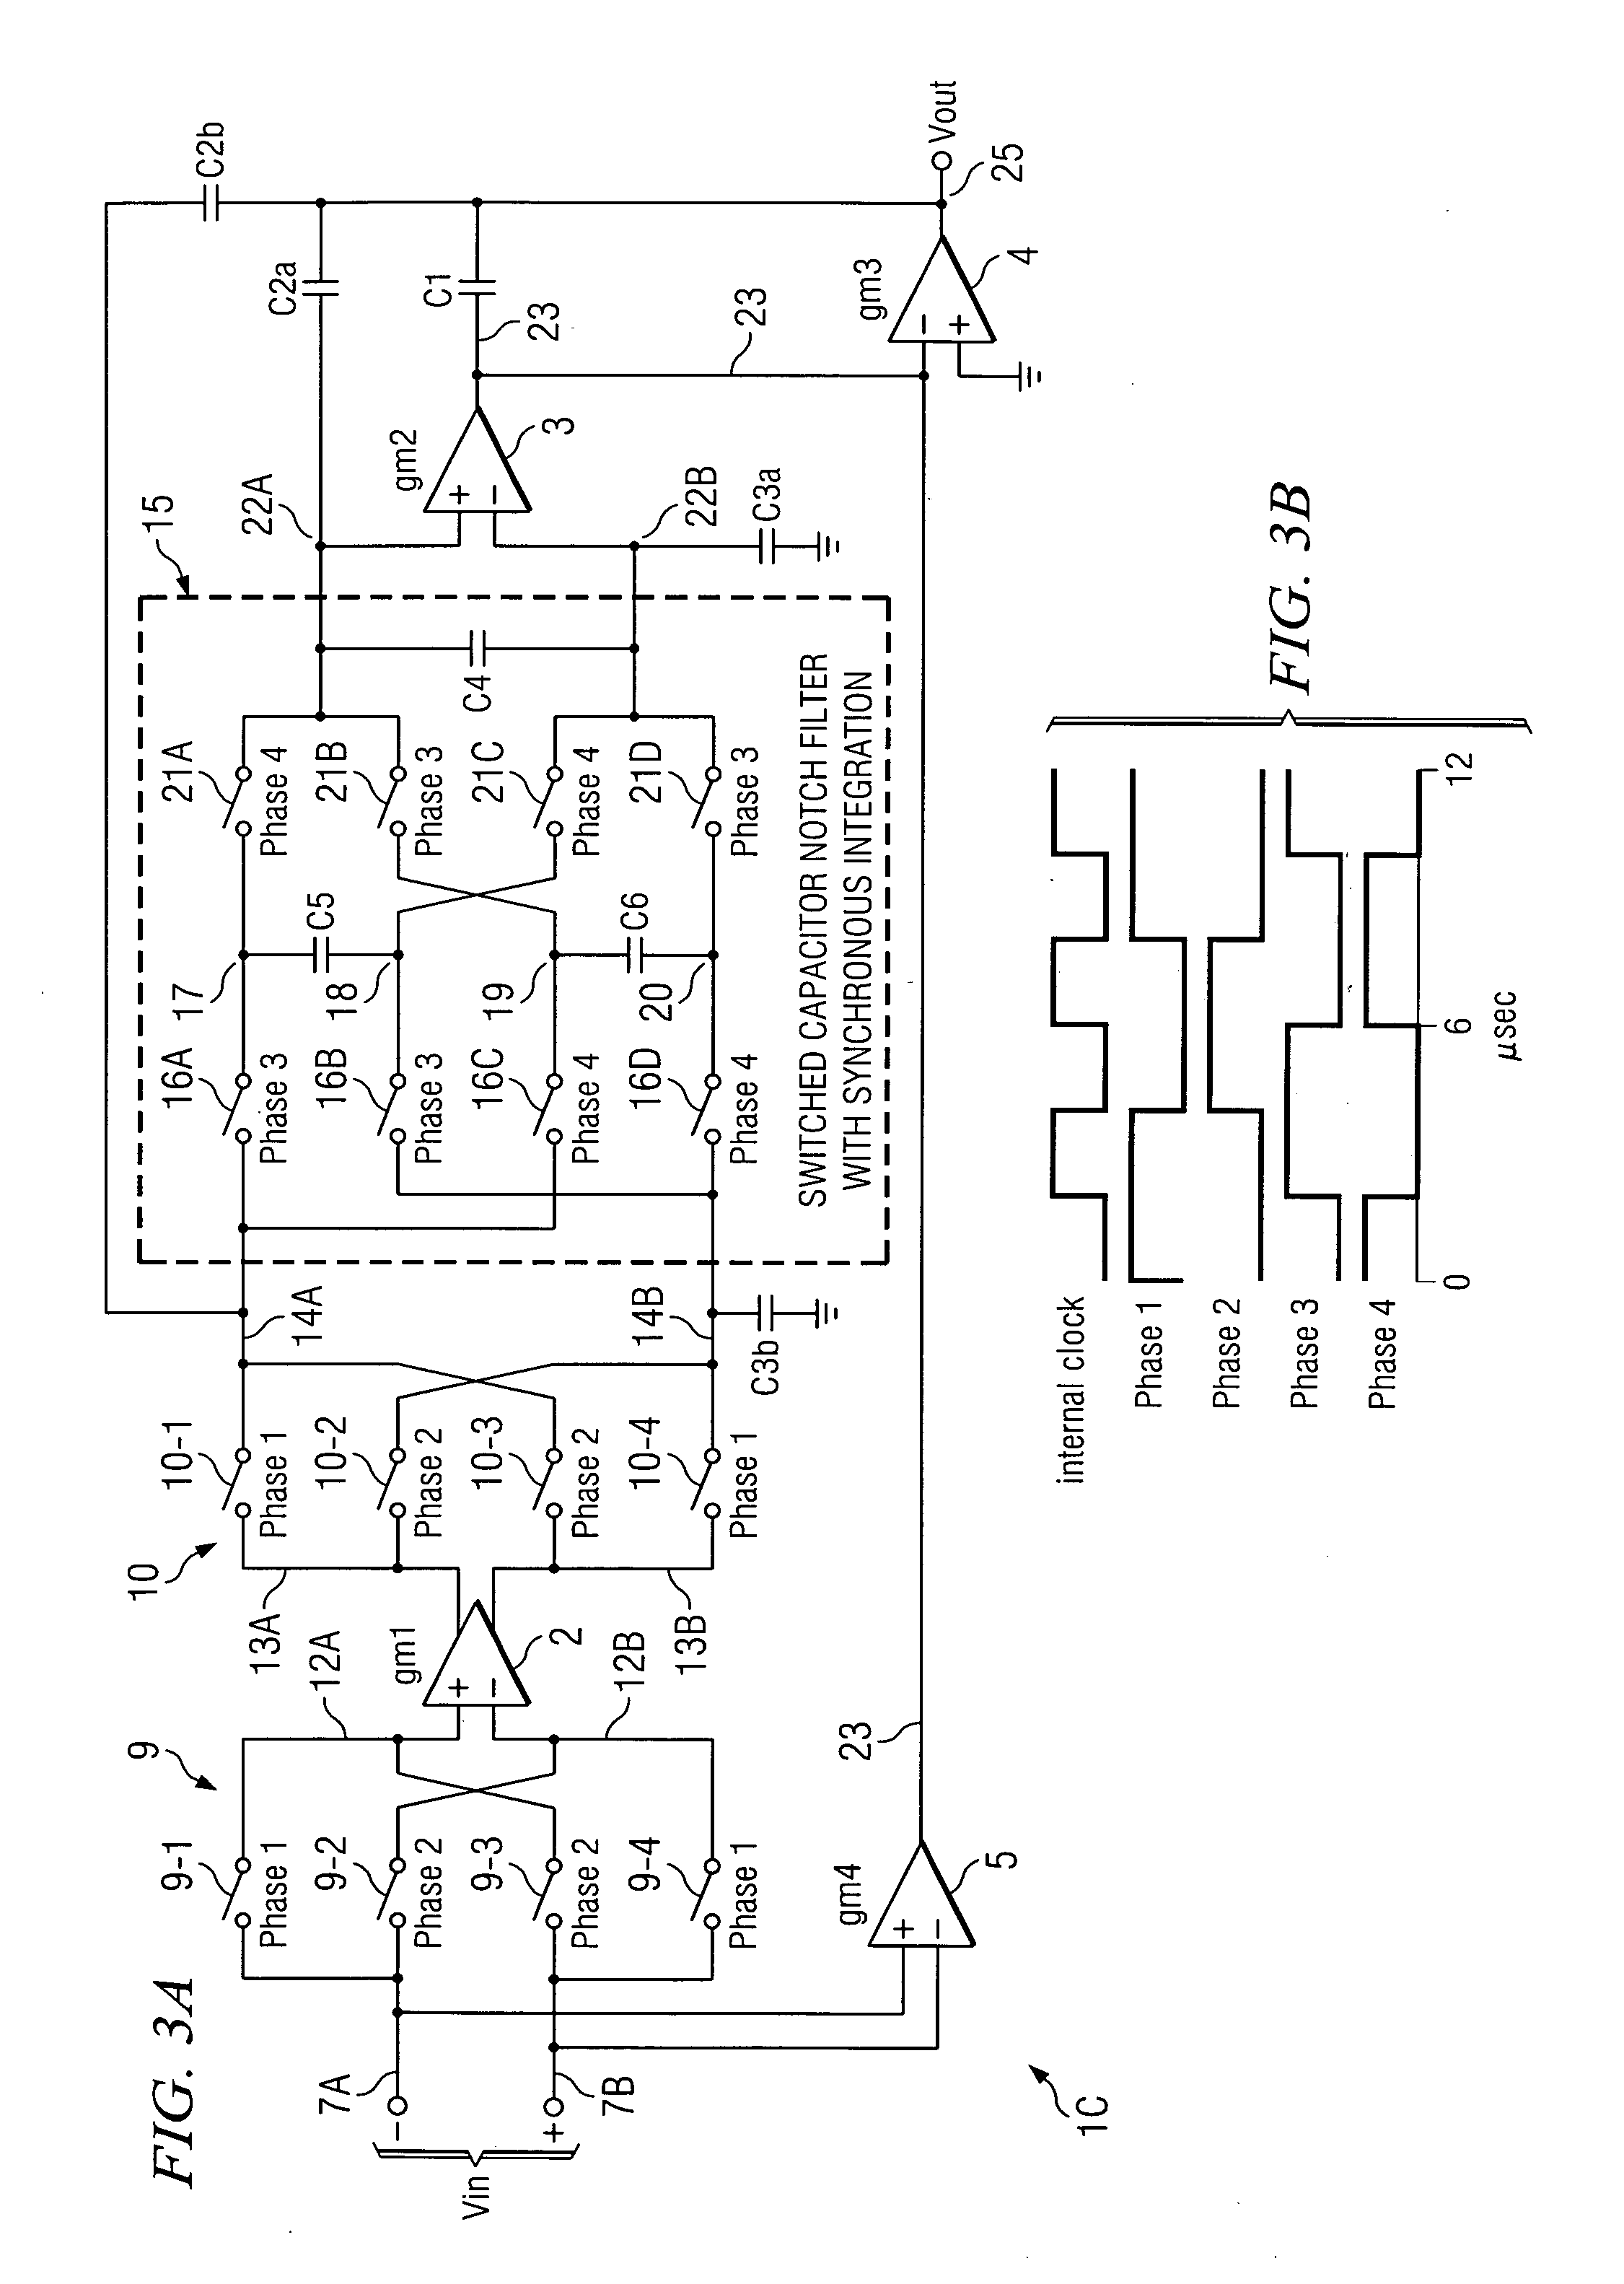 Notch filter for ripple reduction in chopper stabilized amplifiers